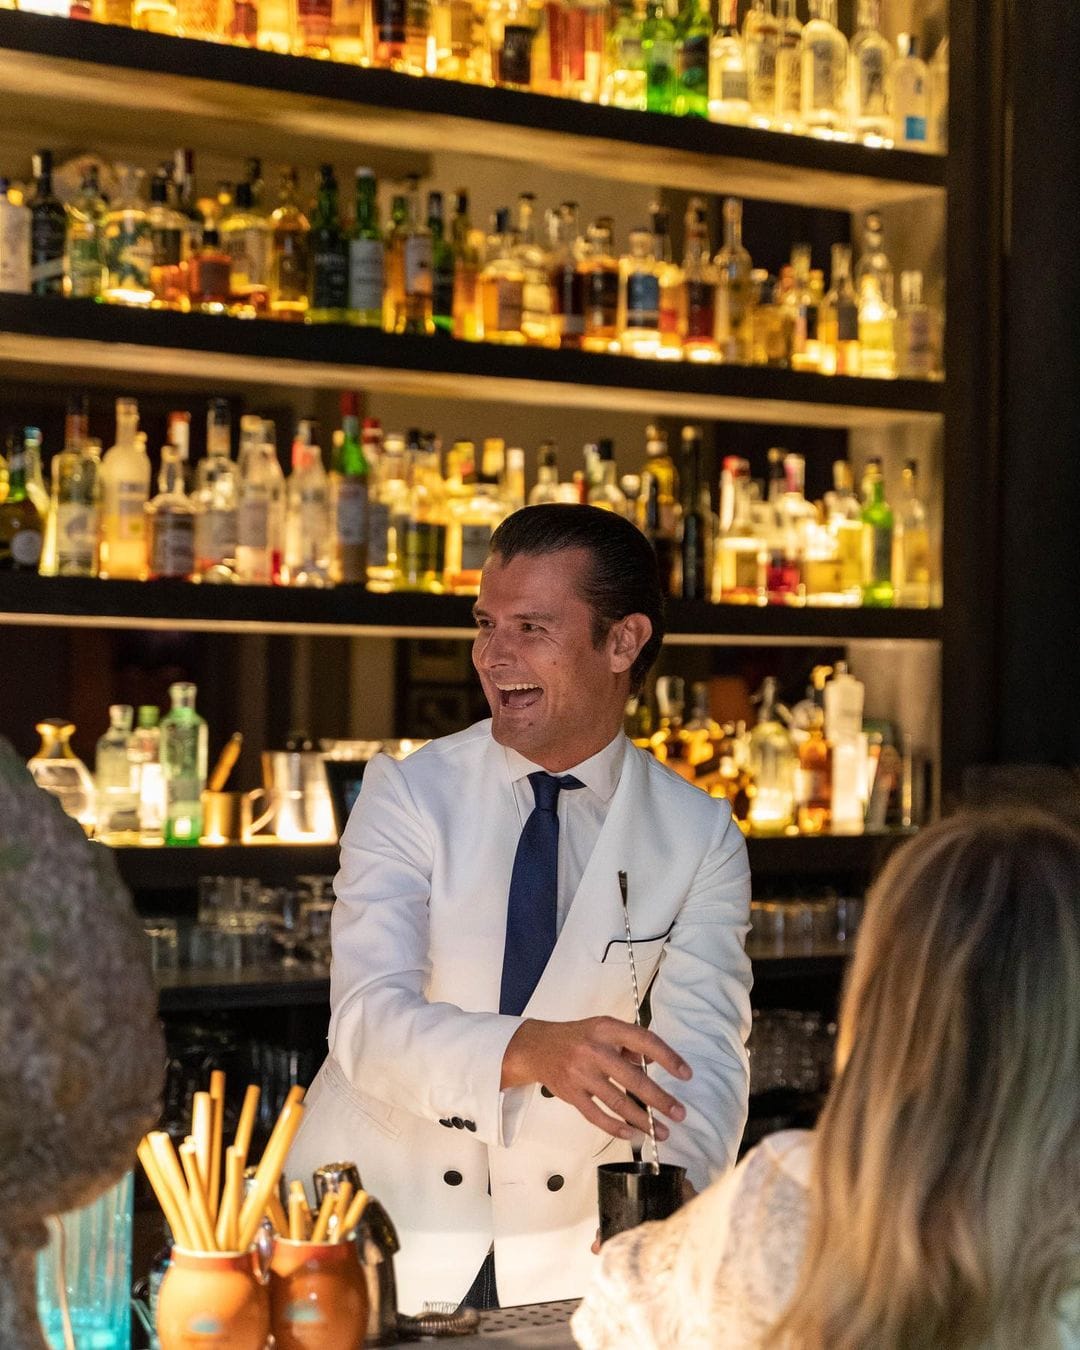 “You have to be a risk-taker,” says award-winning bartender Erik Lorincz